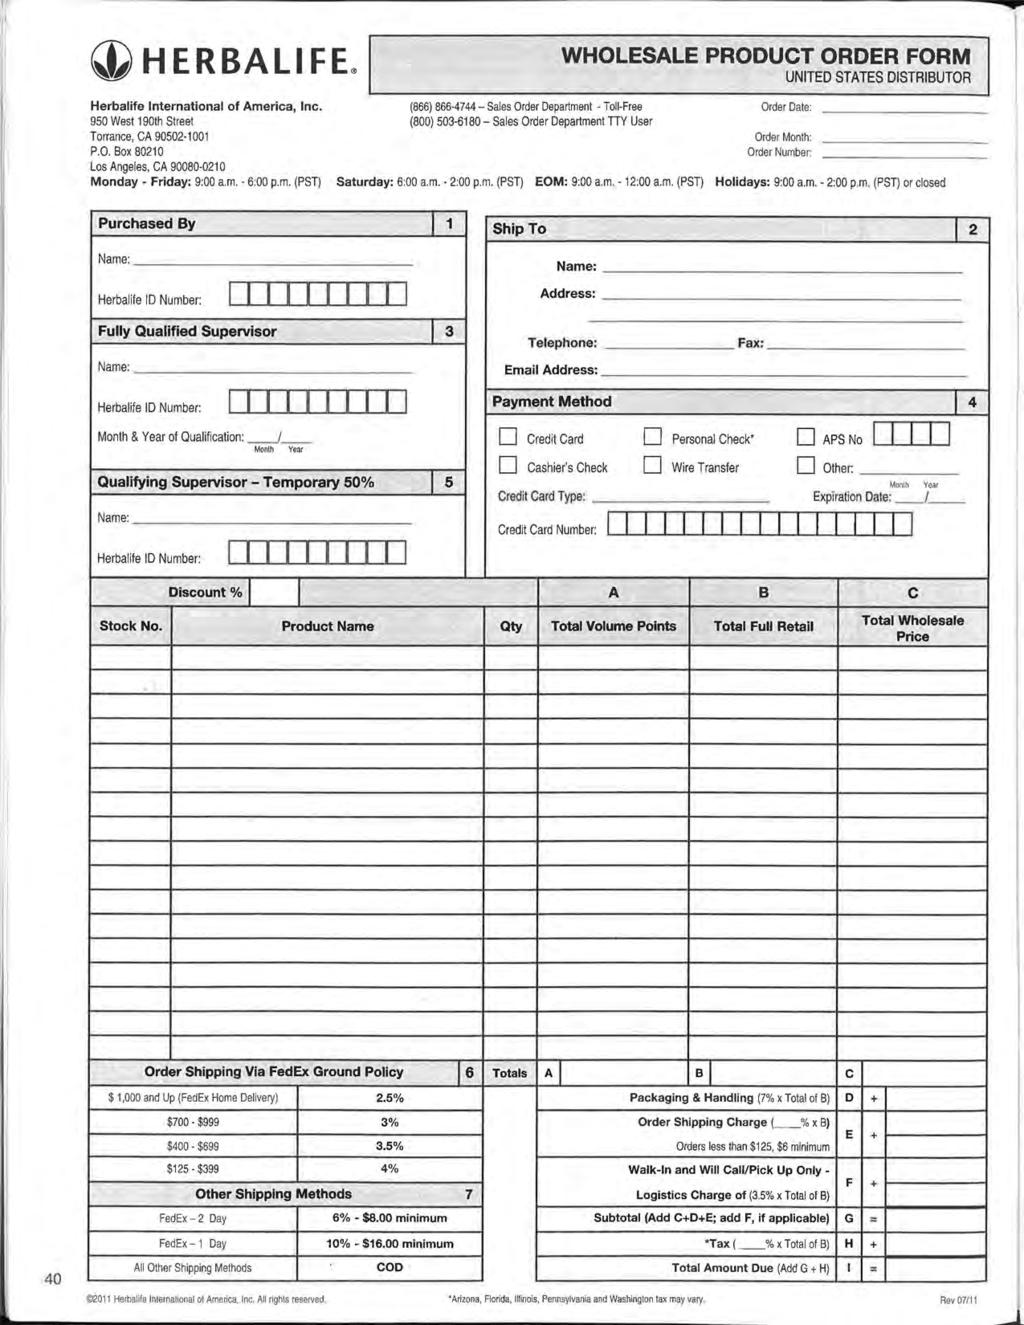 1 f Case 2:13-cv-02488-BRO-SH Document 78-3 Filed 07/07/14 Page 40 of 60 Page ID #:2312 WHOLESALE PRODUCT ORDER FORM UNITED STATES DISTRIBUTOR ~ H ERBAll FE Herbalife International of America, Inc.